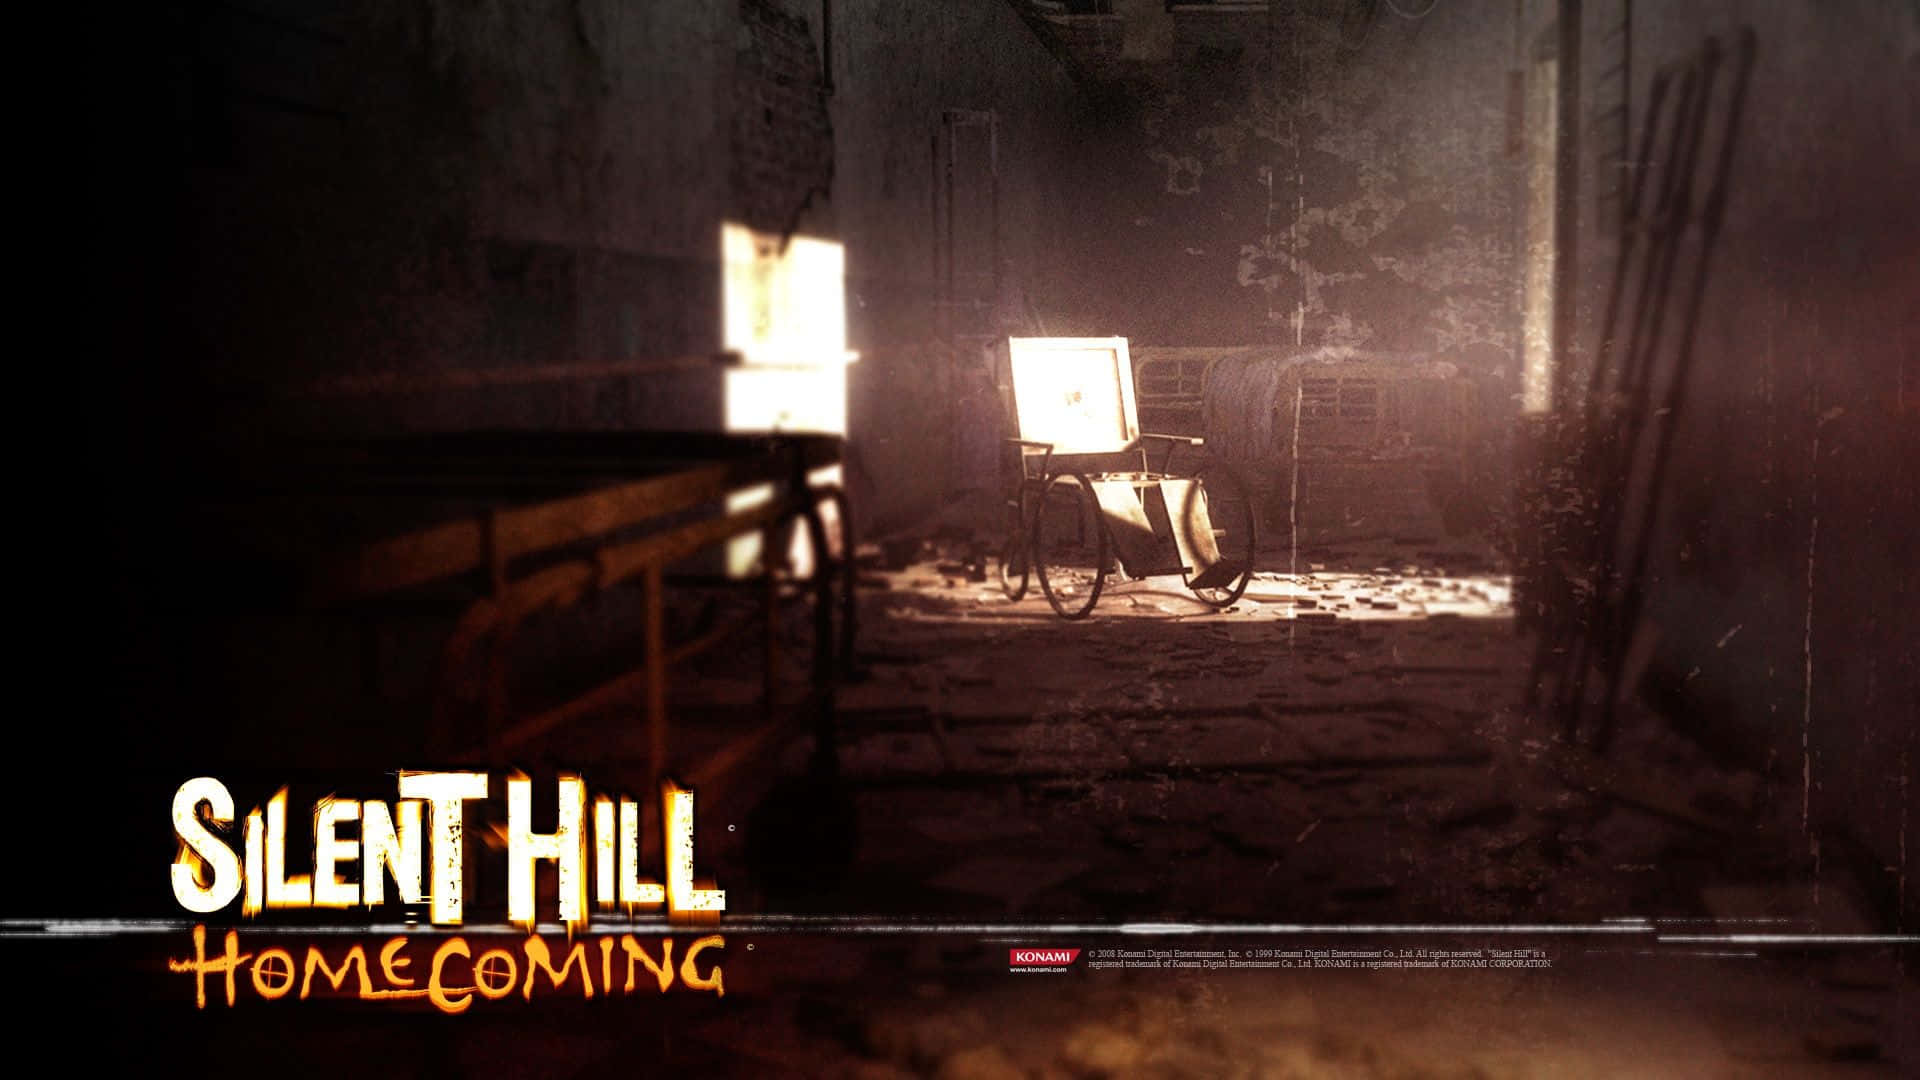 Image  "Explore the Mysterious Town of Silent Hill"